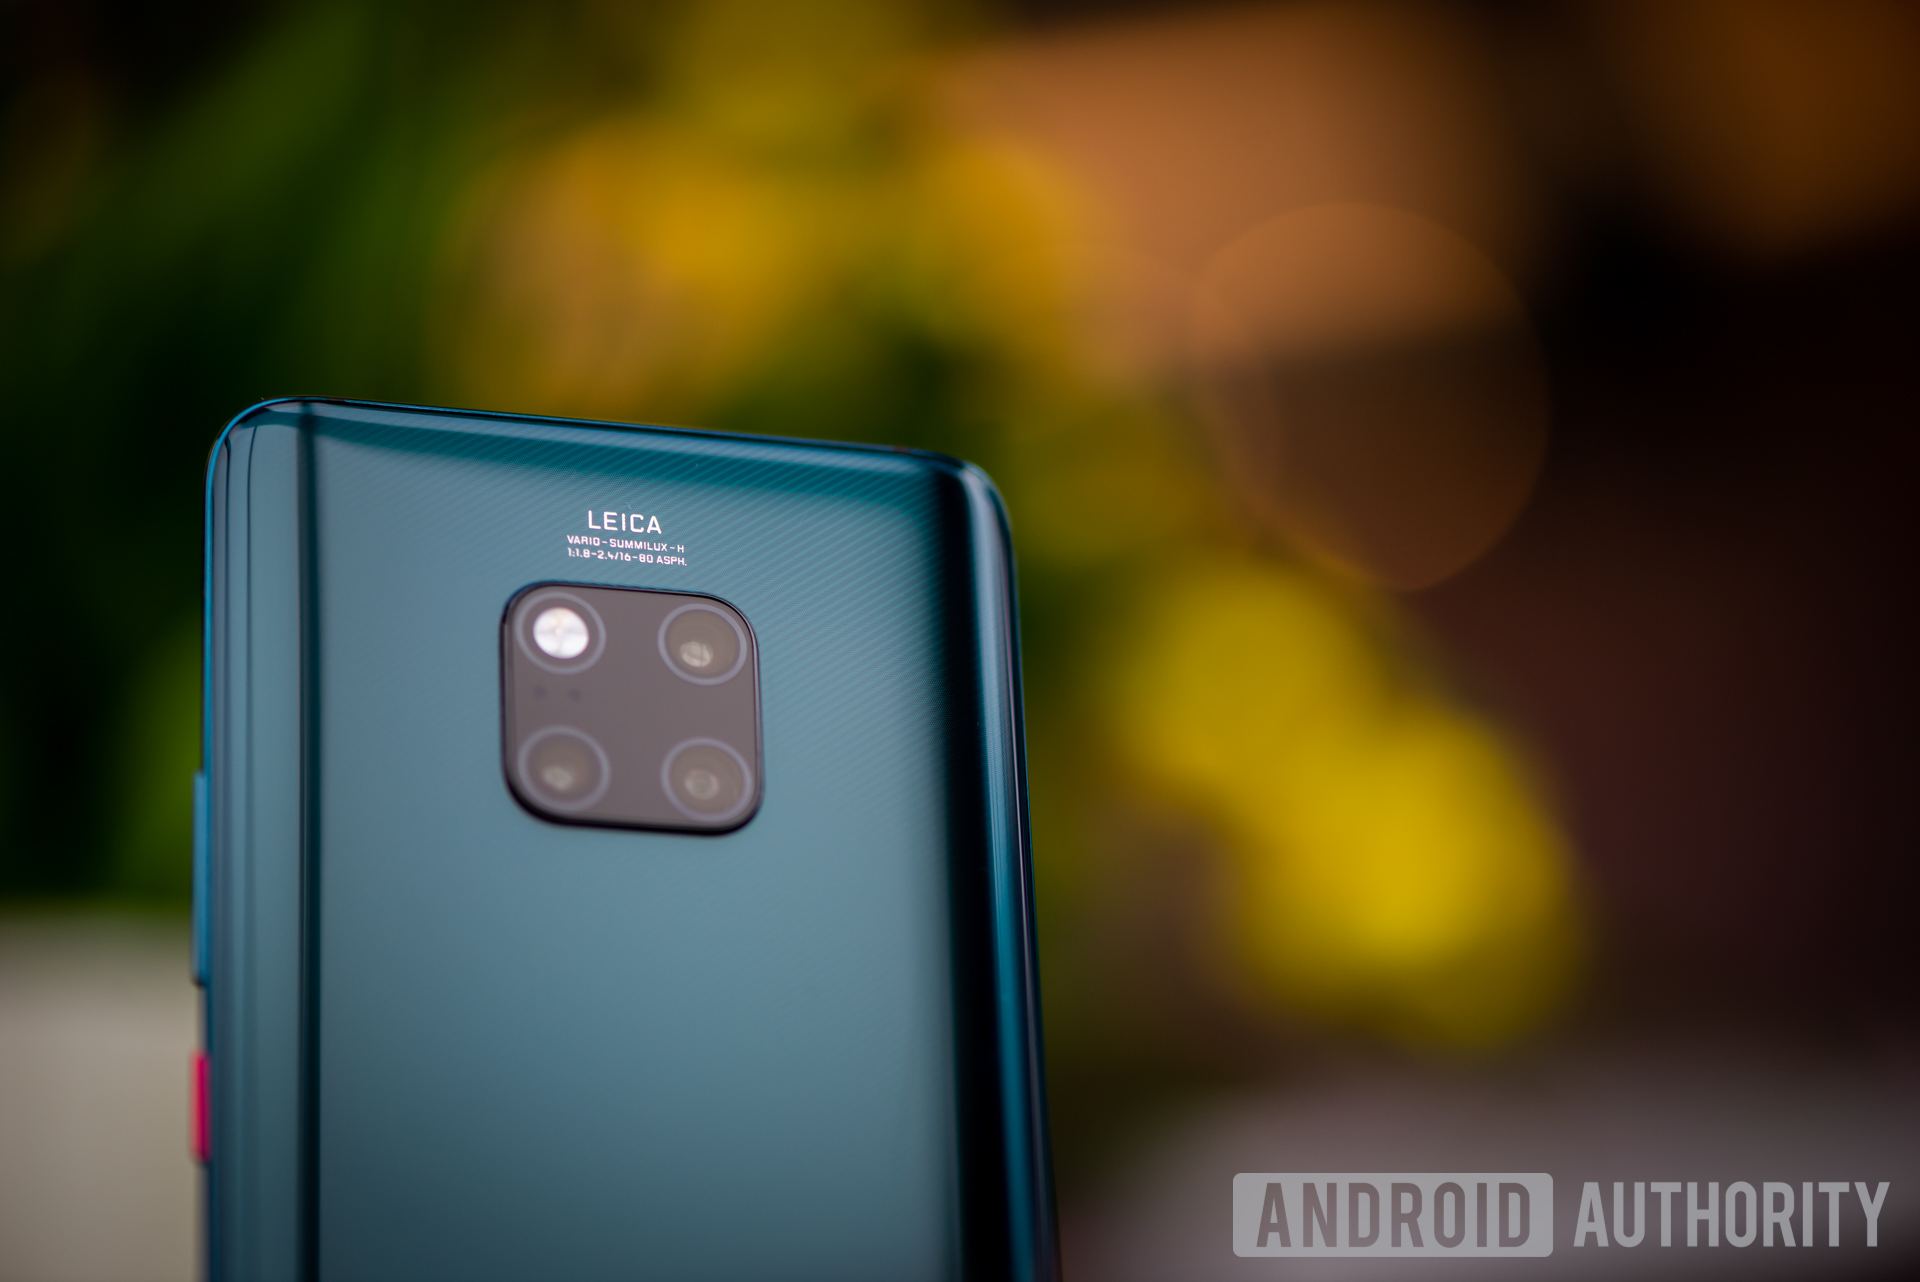 HUAWEI Mate 20 Pro and HUAWEI Mate 20: Specs, release date, price